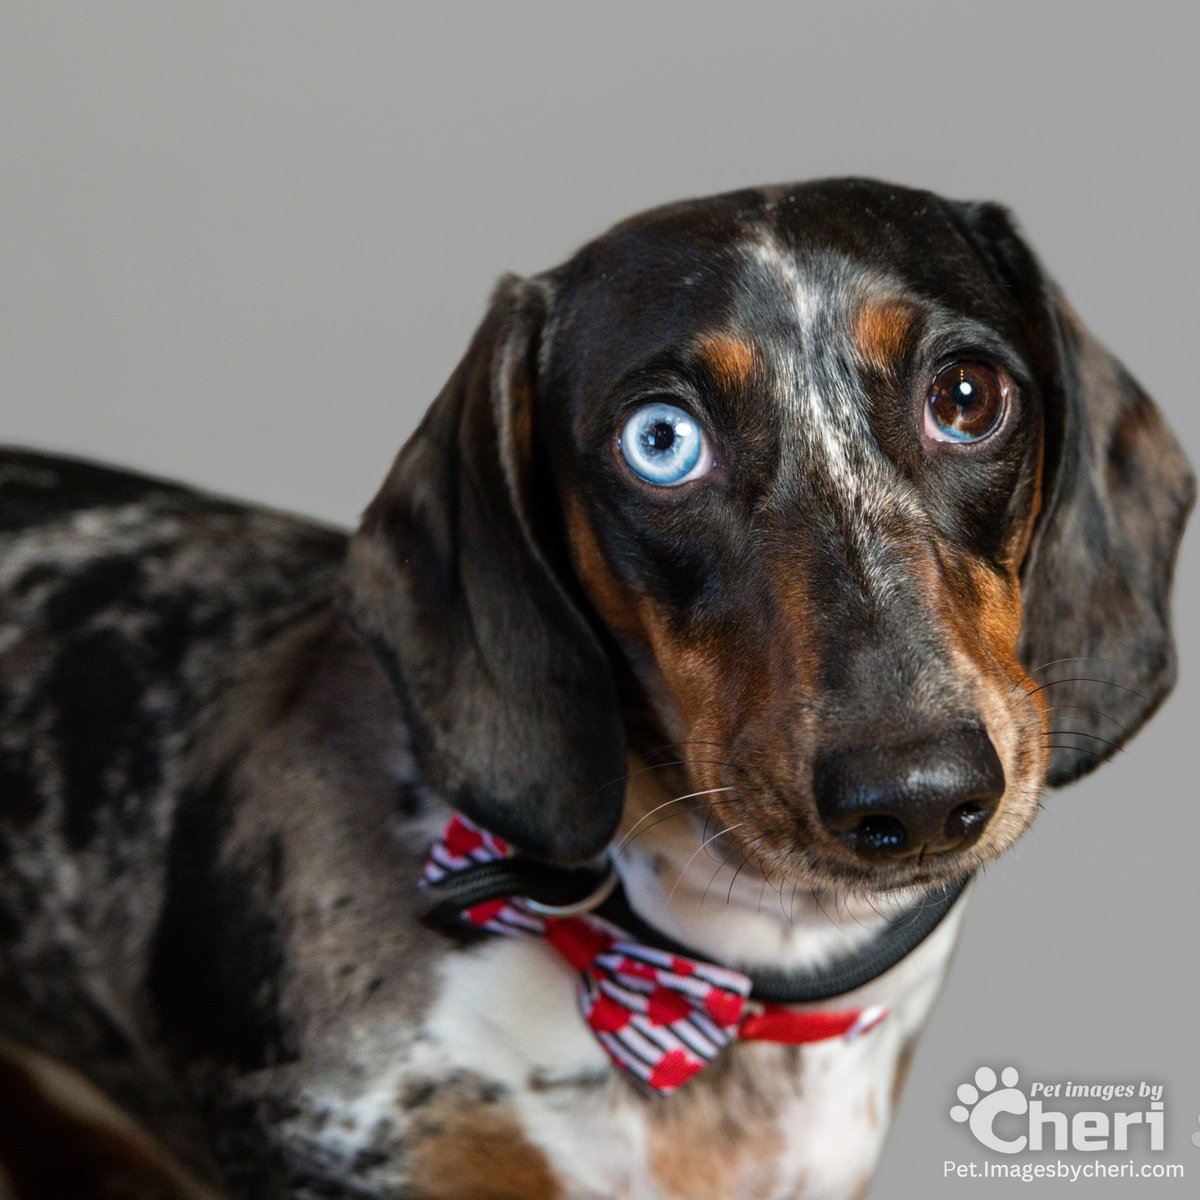 Capturing the mischief and soul of our furry friends in every shot! 🐶✨ Experience the charm and boundless love of your pet in a portrait from pet.imagesbycheri.com
-
#Pets #Dogs #Cute #PetPortraits #DogLovers #PuppyEyes #FurryFriends #PetsofInstagram #Adorable #Photography